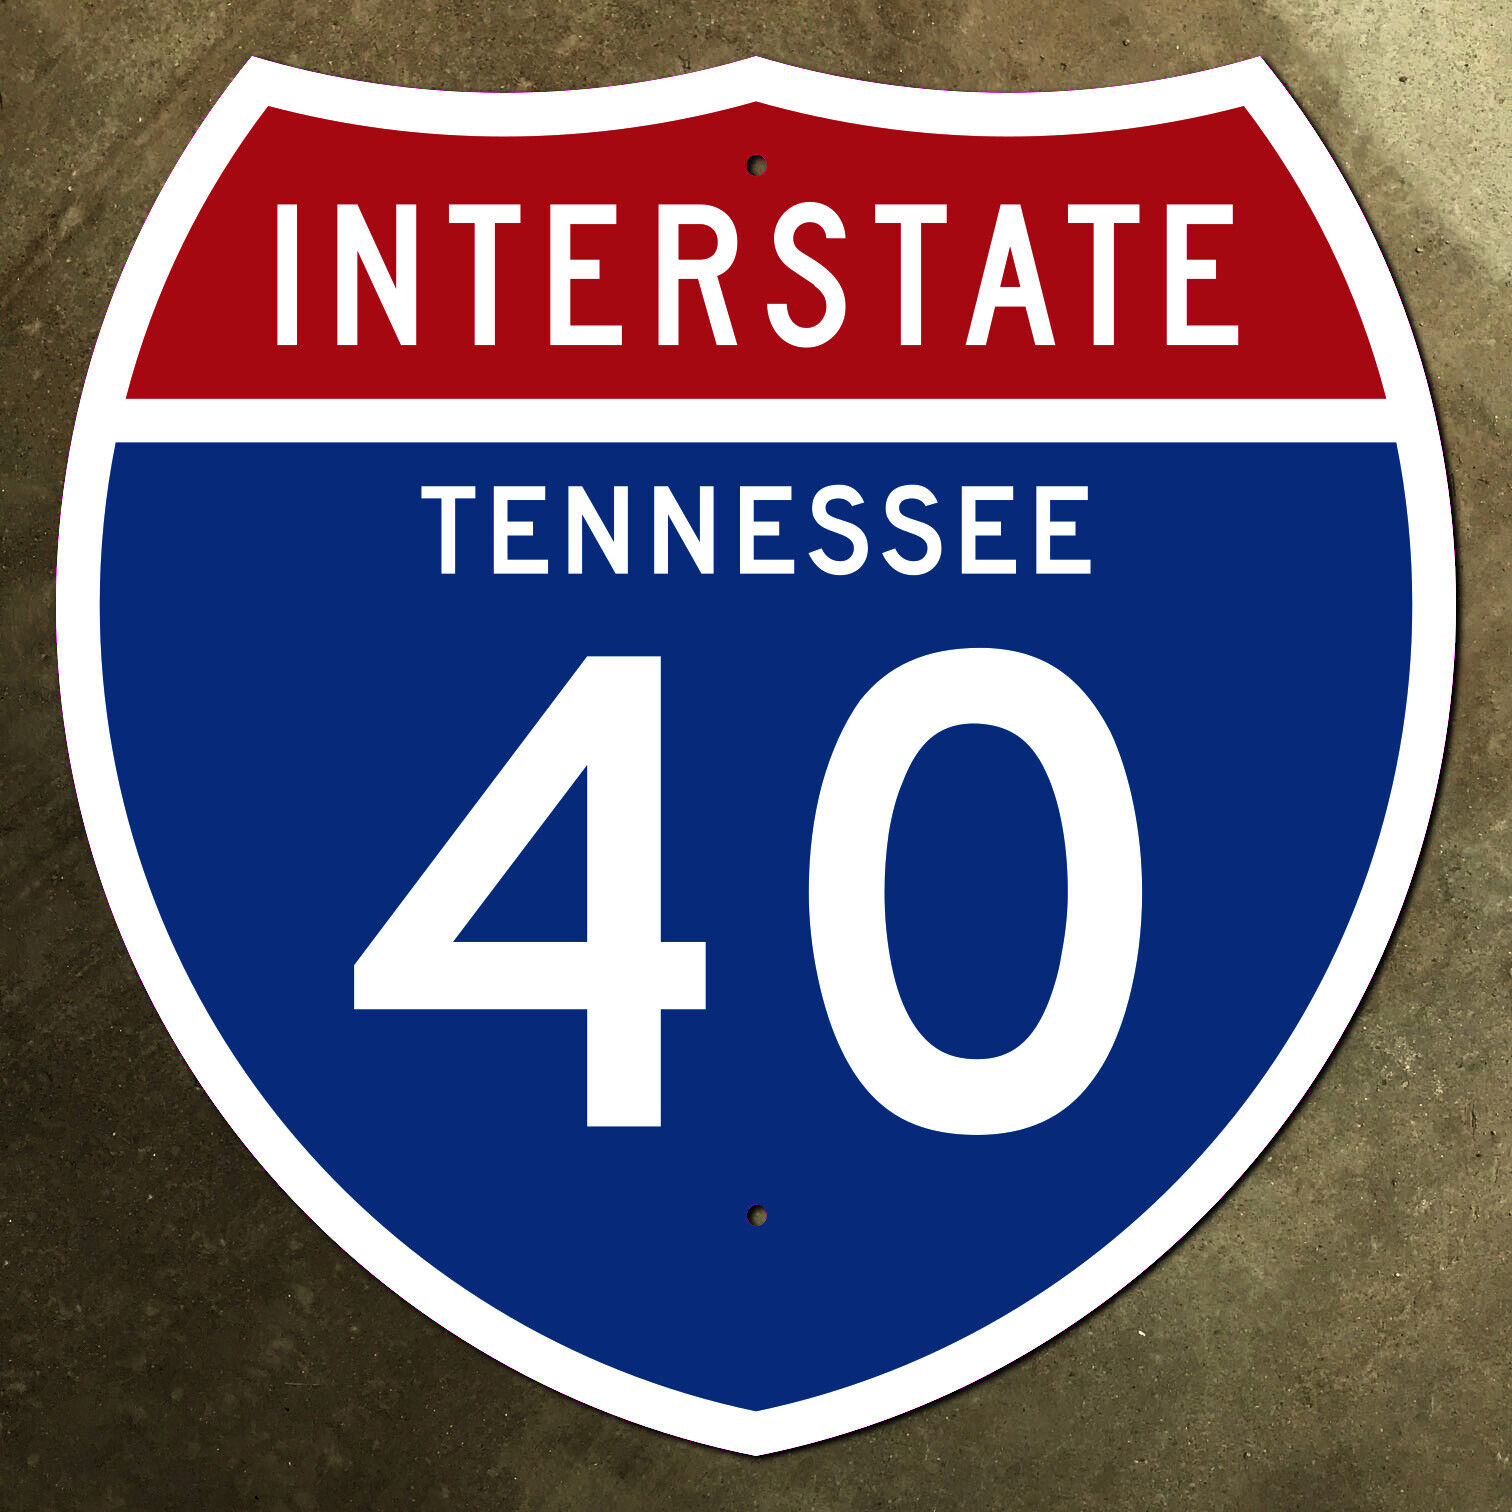 Tennessee interstate route 40 highway marker road sign 18x18 1957 Nashville